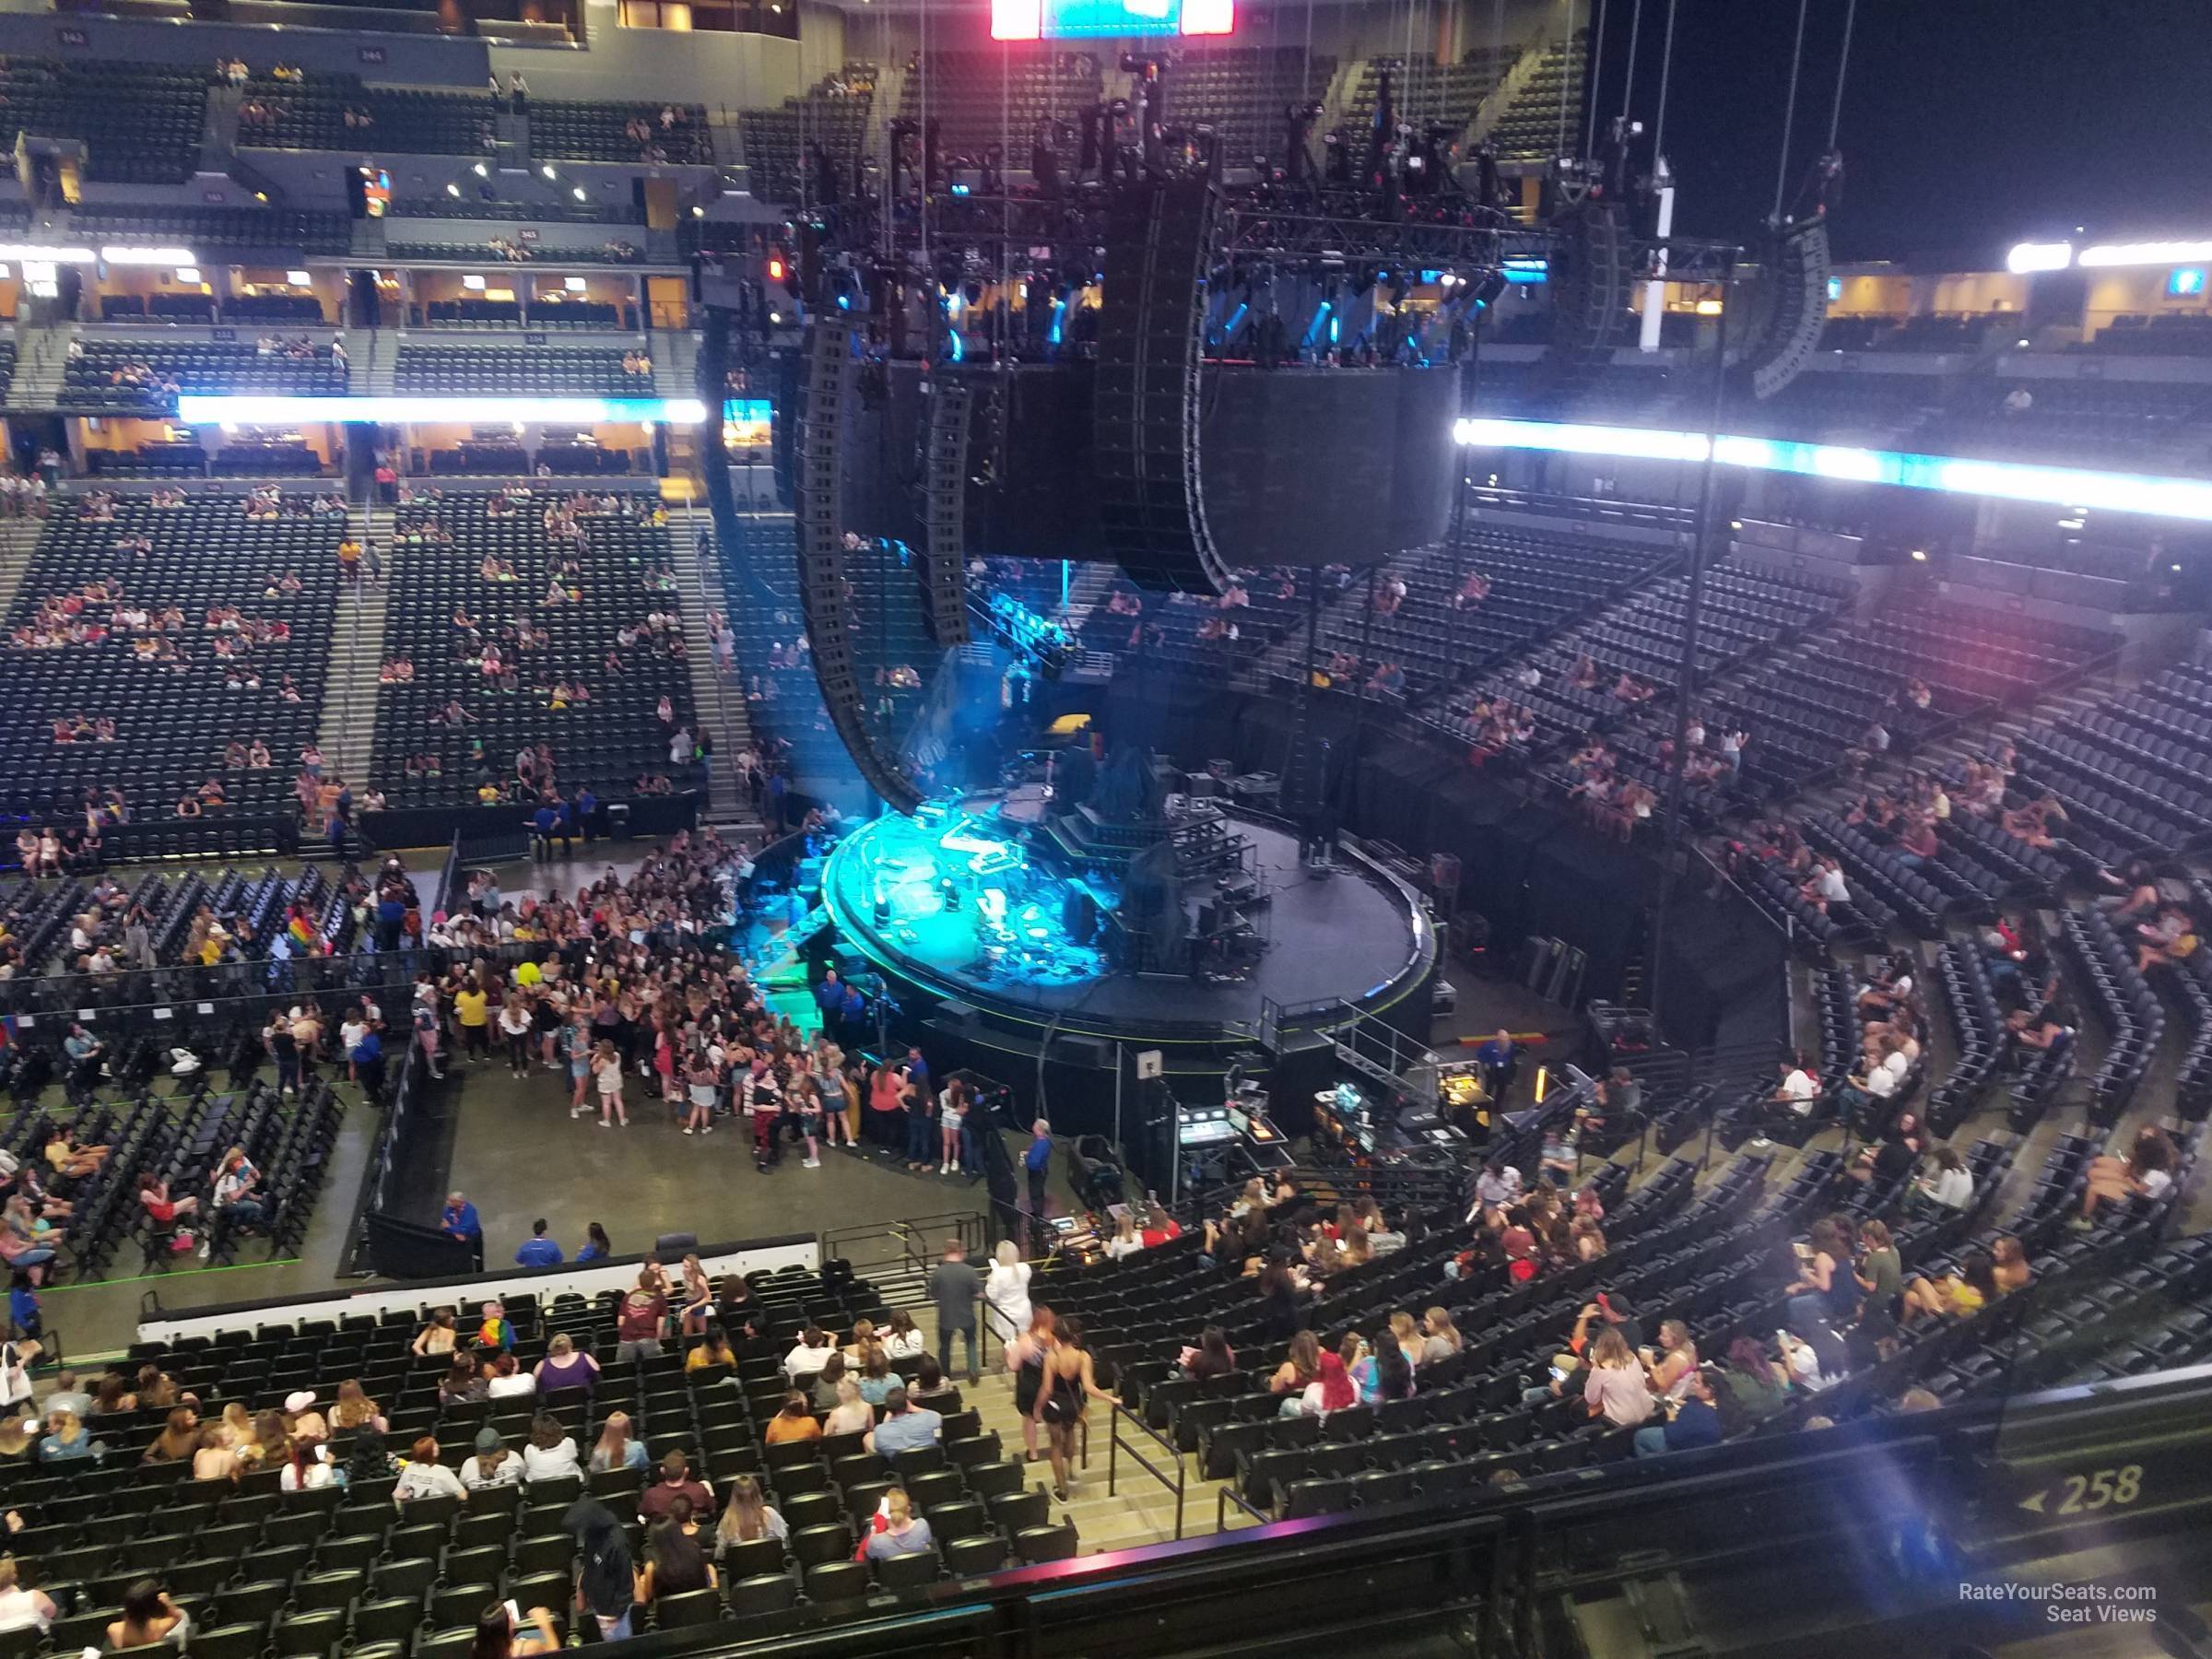 section 258, row 4 seat view  for concert - ball arena